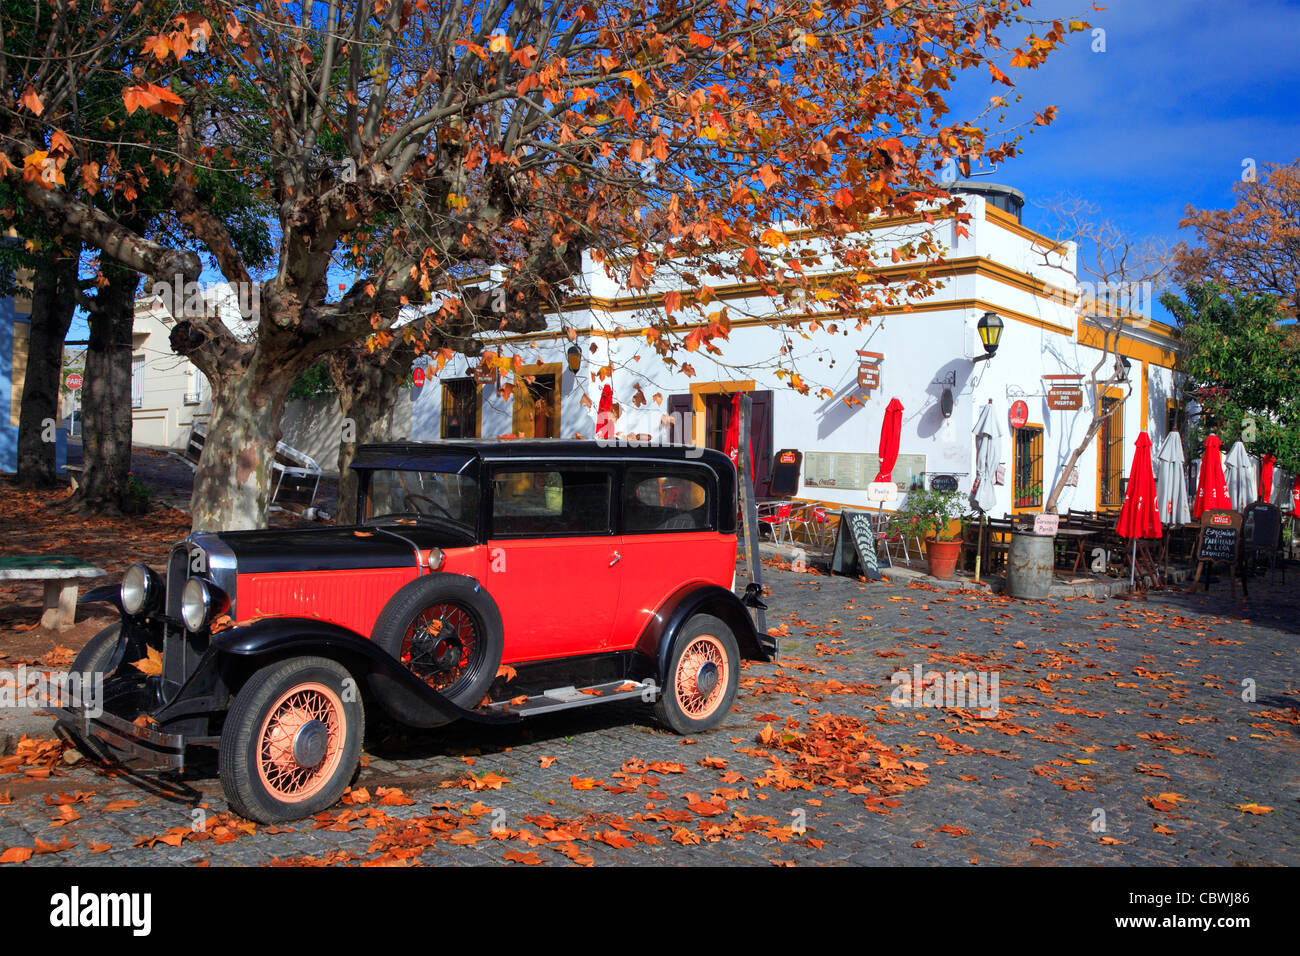 Old red and black restored antique car at Colonia del sacramento street. Uruguay, south america. Stock Photo